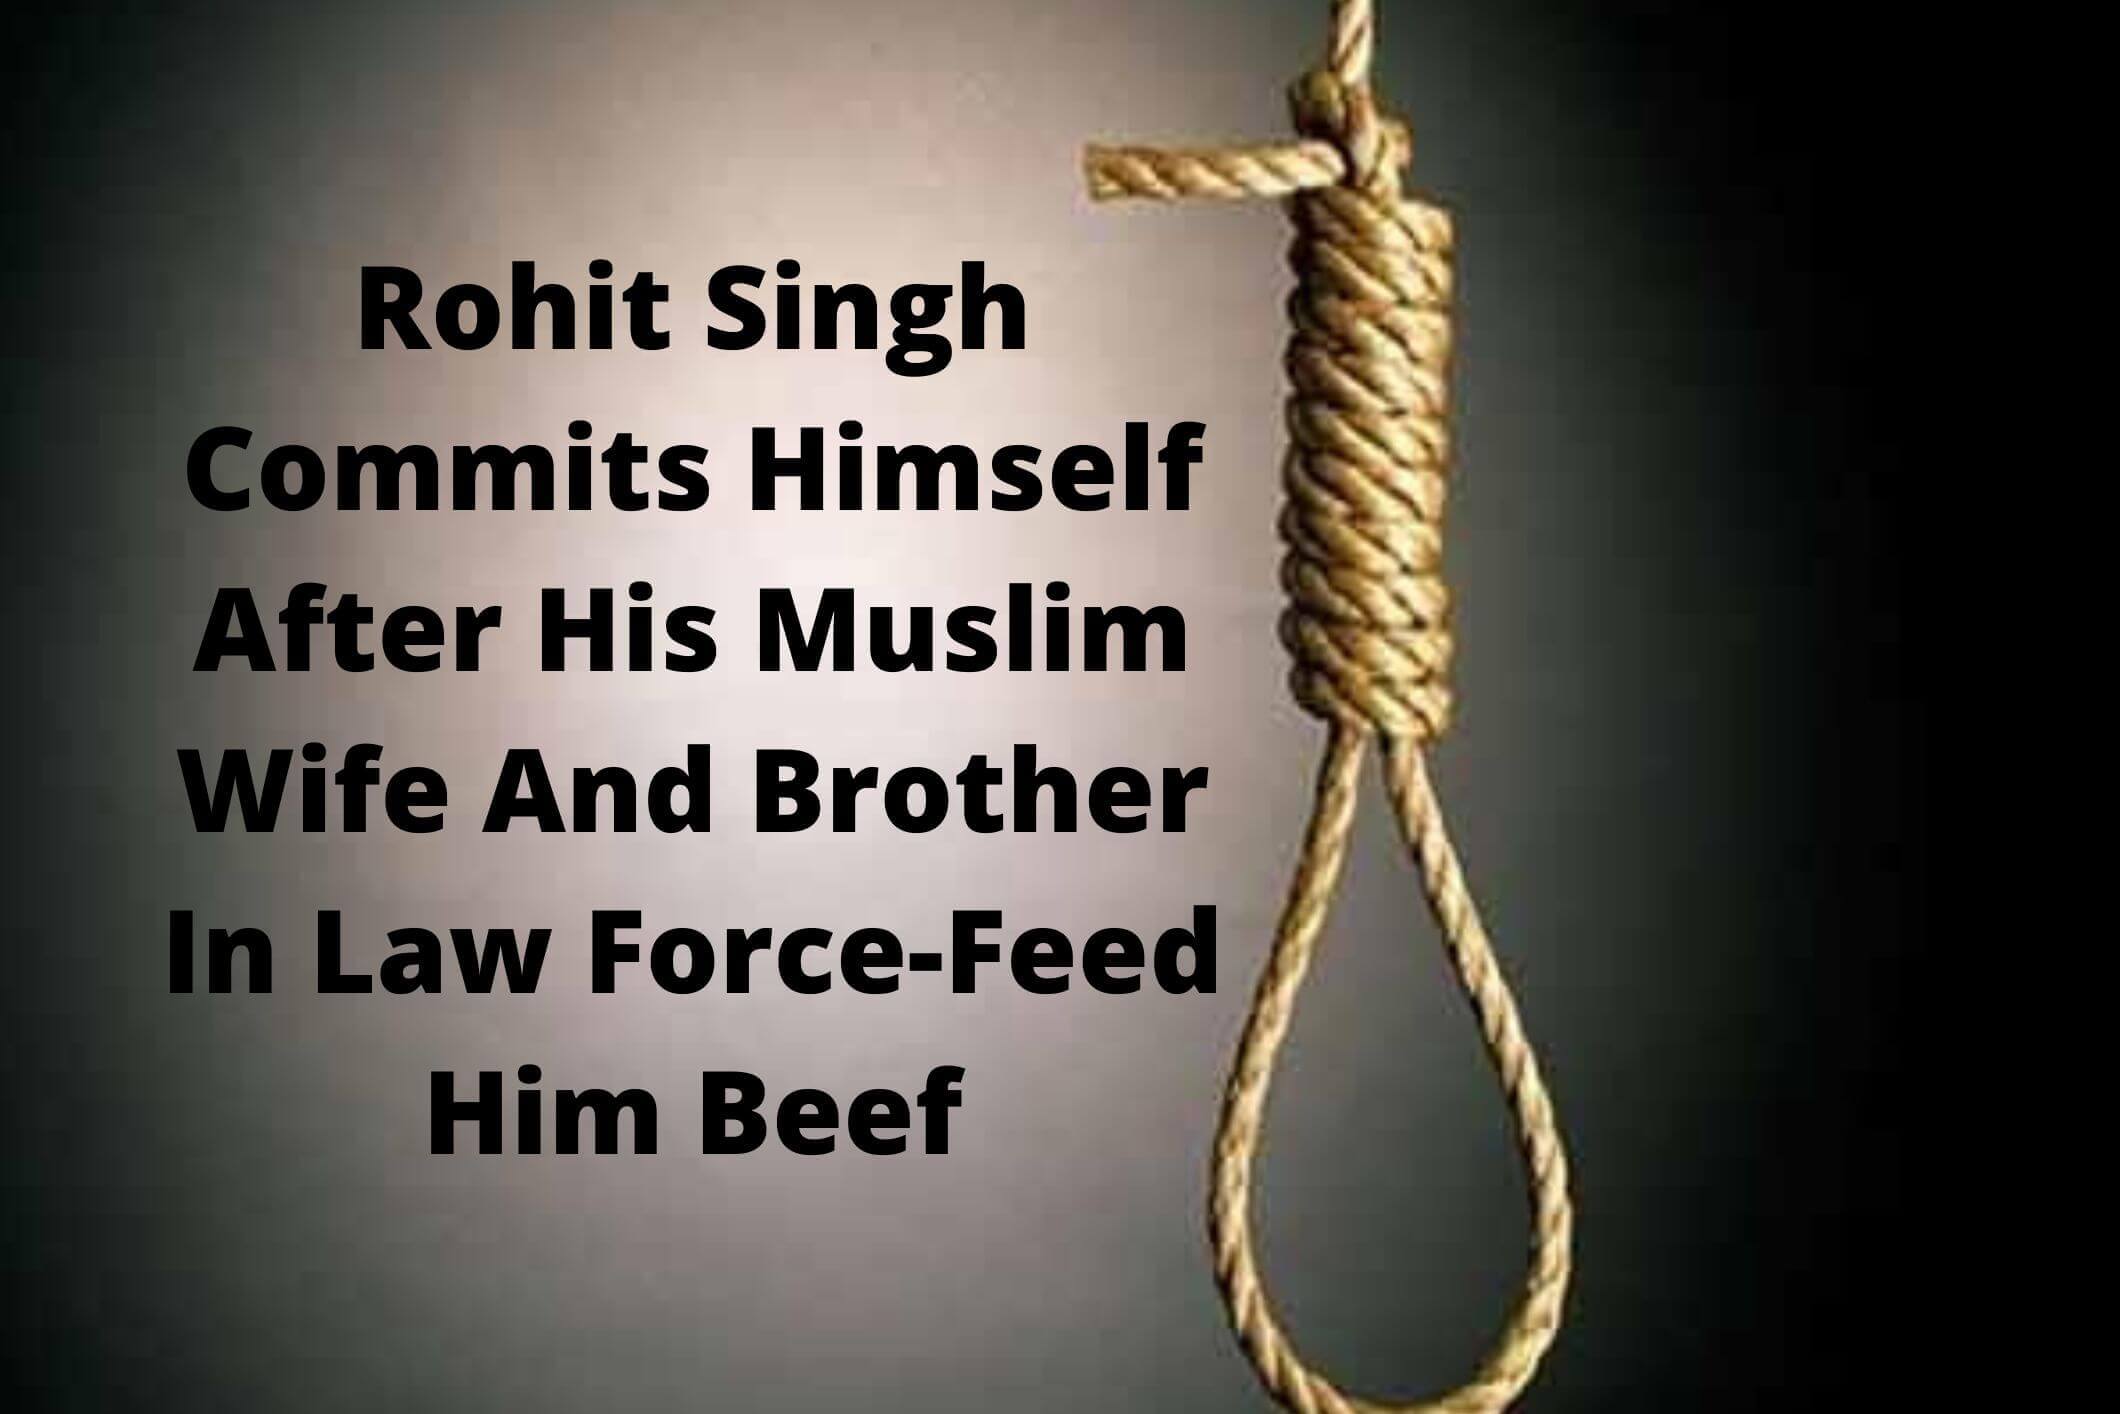 Rohit Singh Commits Himself After His Muslim Wife And Brother In Law Force-Feed Him Beef